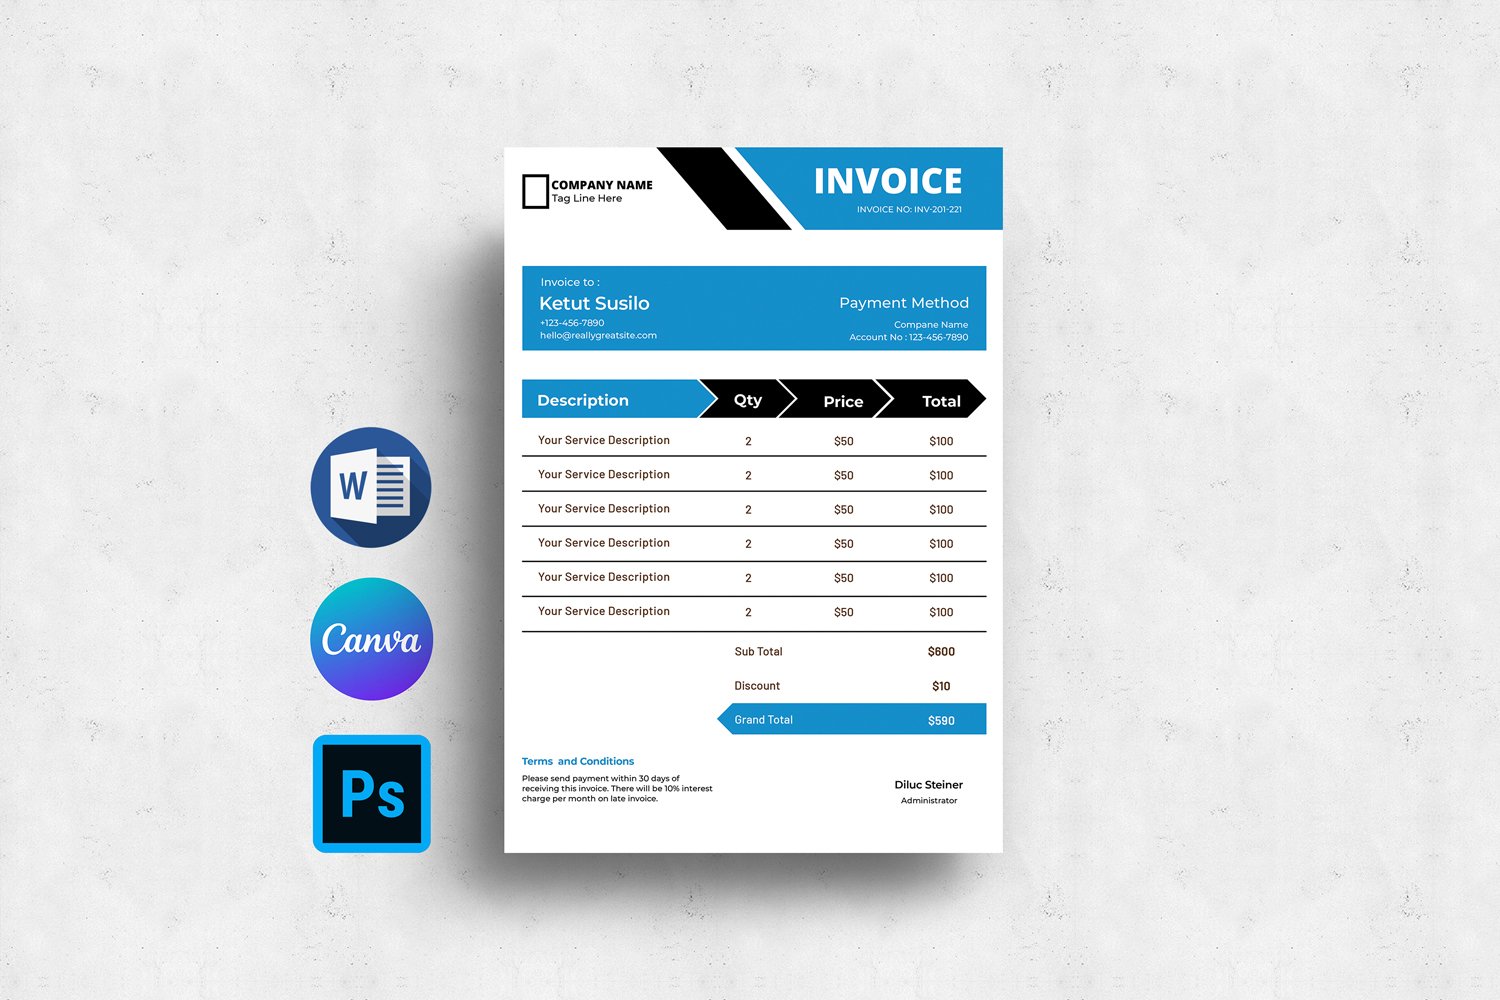 Template #371696 Invoice Template Webdesign Template - Logo template Preview